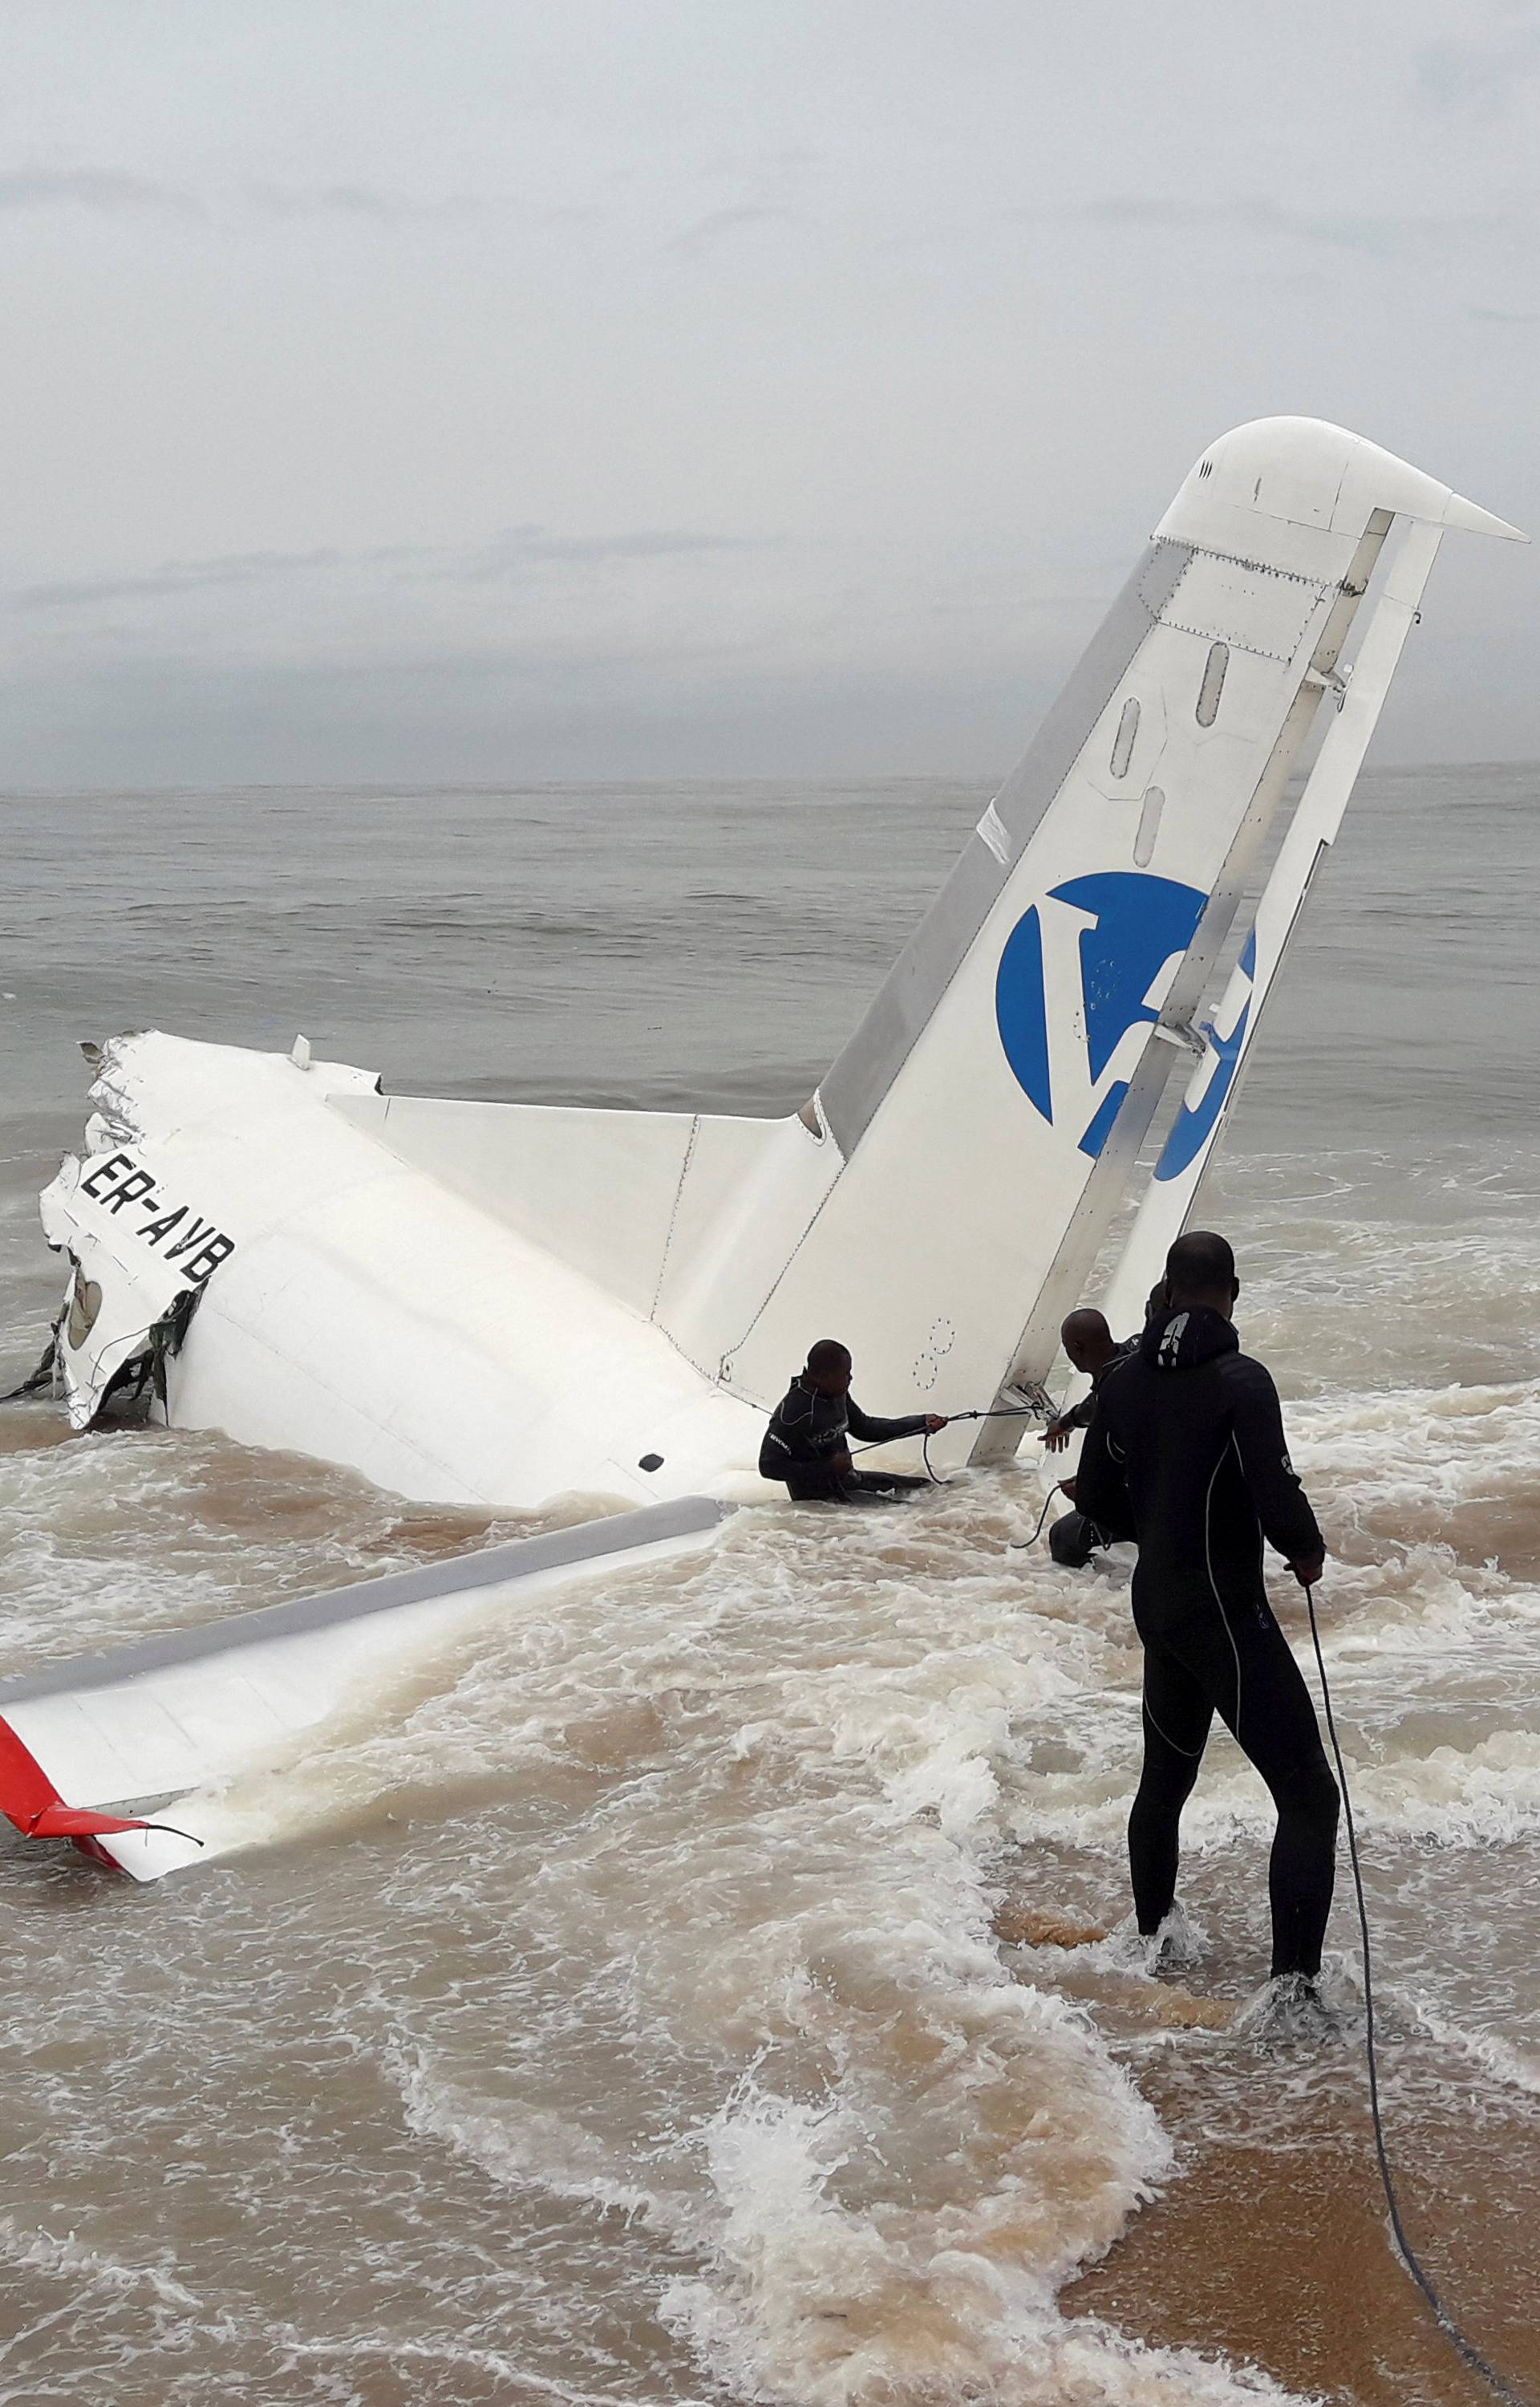 Rescuers pull the wreckage of a propeller-engine cargo plane after it crashed in the sea near the international airport in Ivory Coast's main city, Abidjan